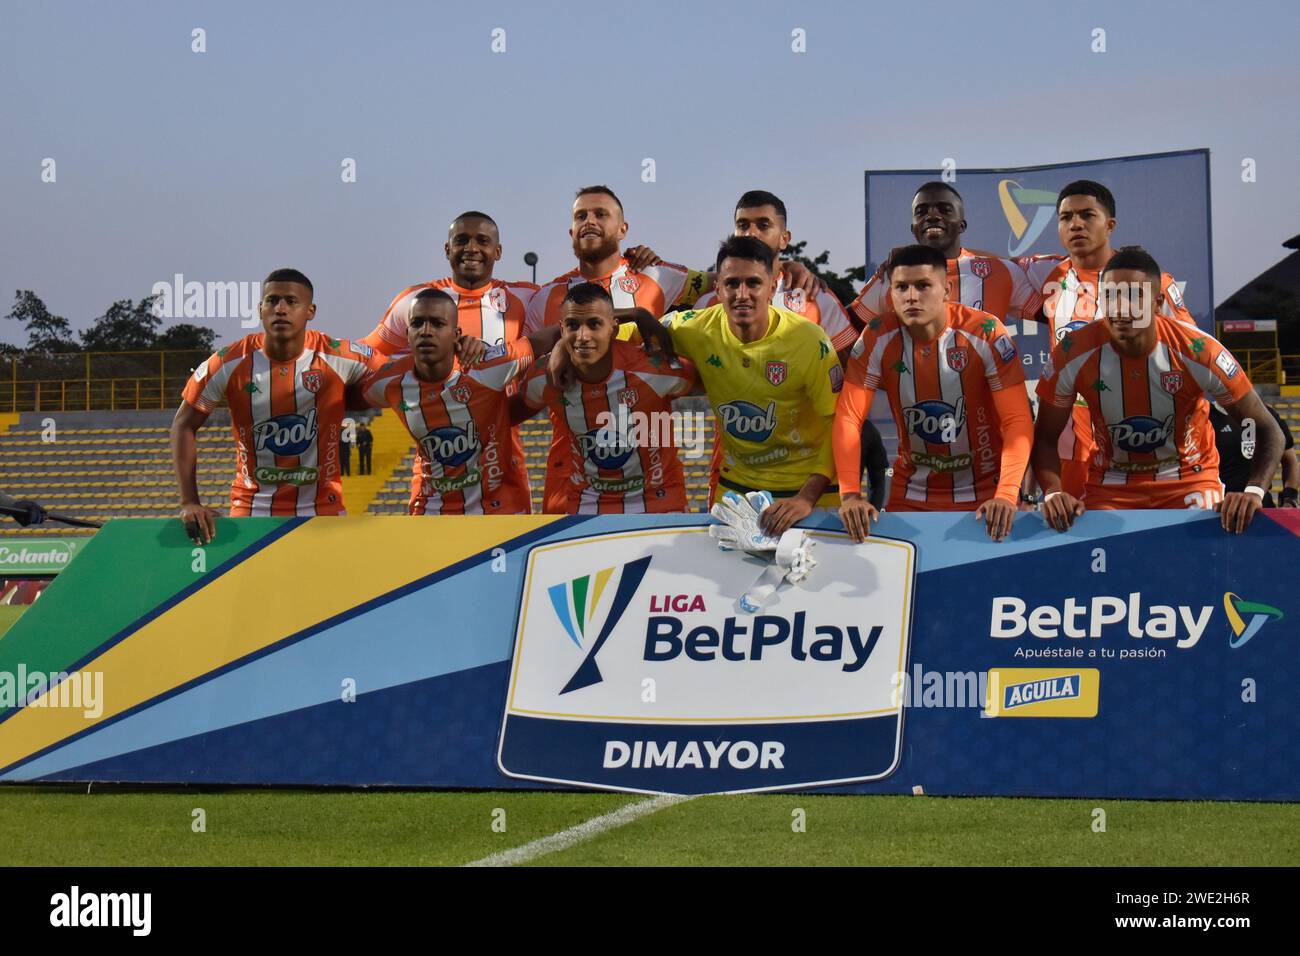 Bogota, Colombia. 22nd Jan, 2024. The Envigado team poses for the official match photo during the Equidad vs Envigado match for the Betplay Dimayor league in the Techo stadium in Bogota, Colombia, January 22, 2024. Photo by: Cristian Bayona/Long Visual Press Credit: Long Visual Press/Alamy Live News Stock Photo